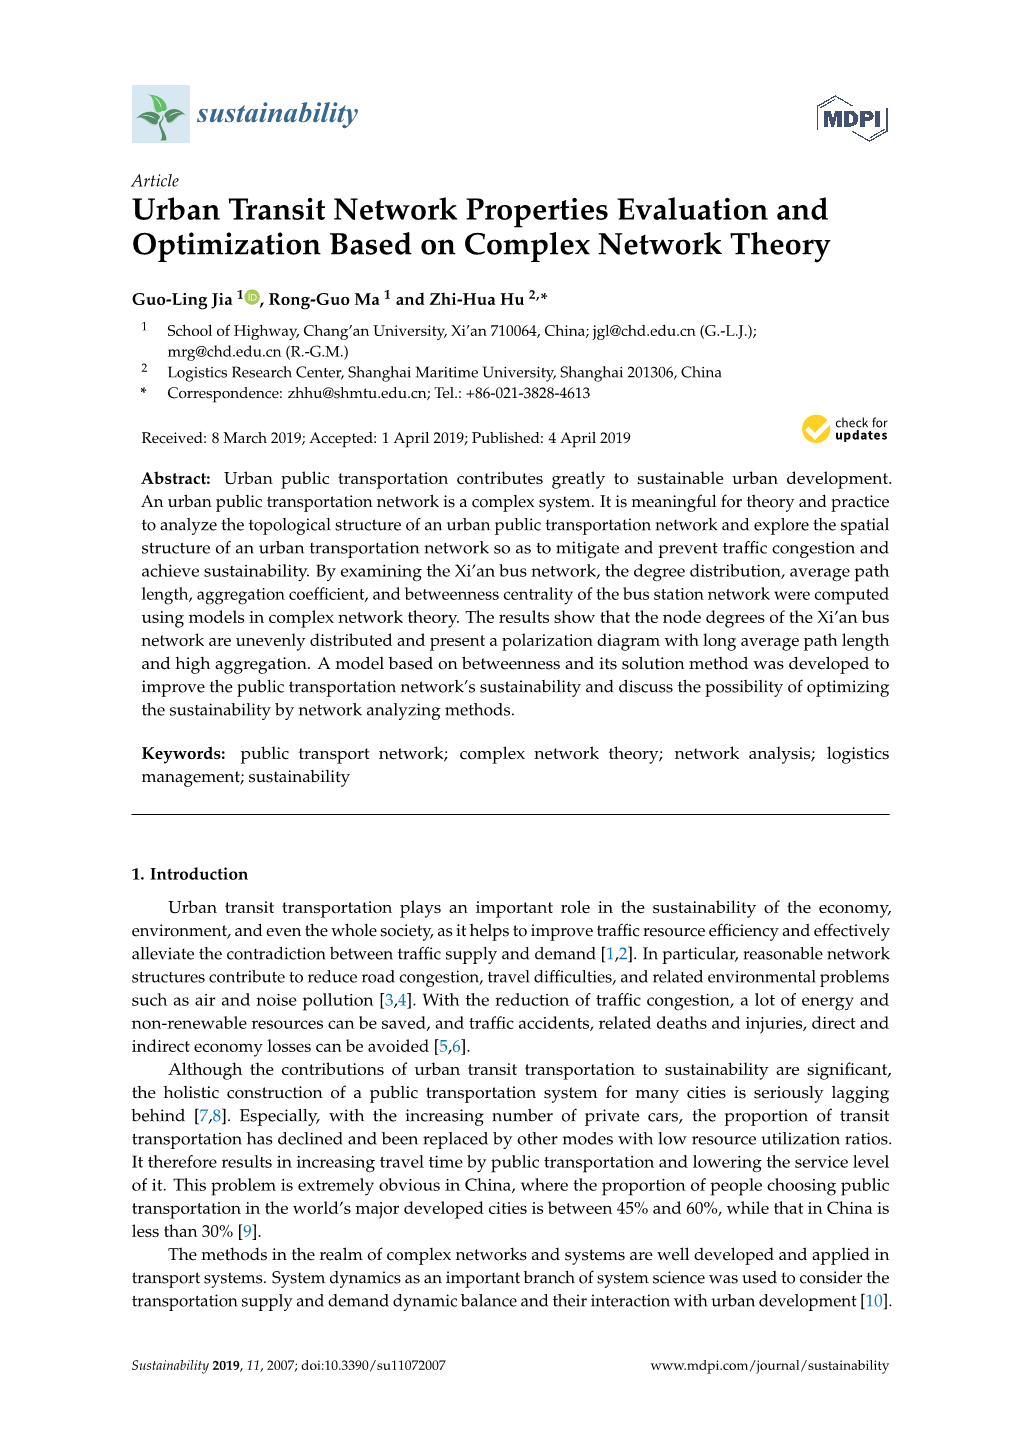 Urban Transit Network Properties Evaluation and Optimization Based on Complex Network Theory